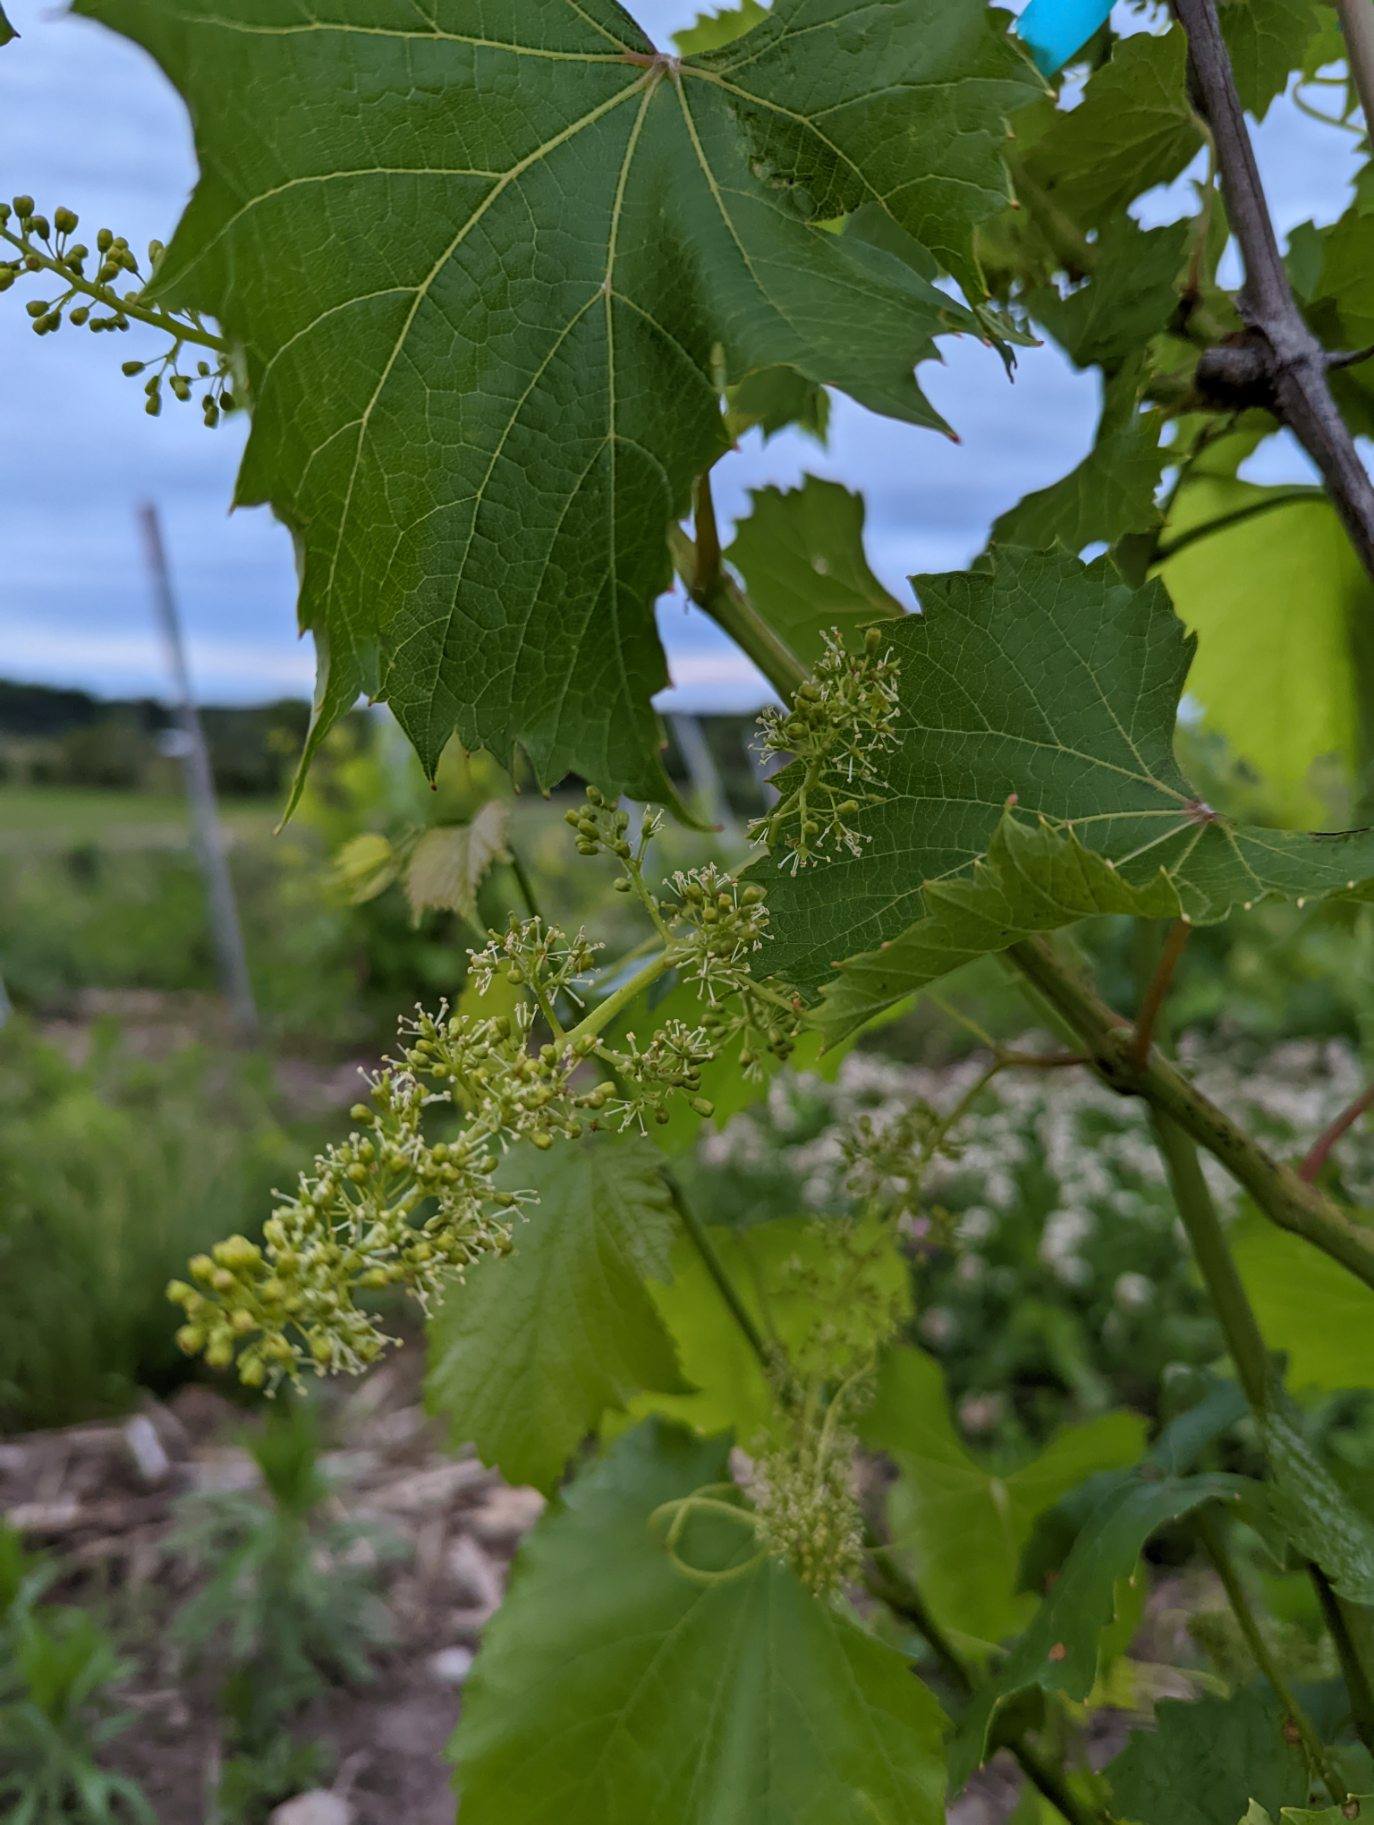 Grapes starting to bloom.